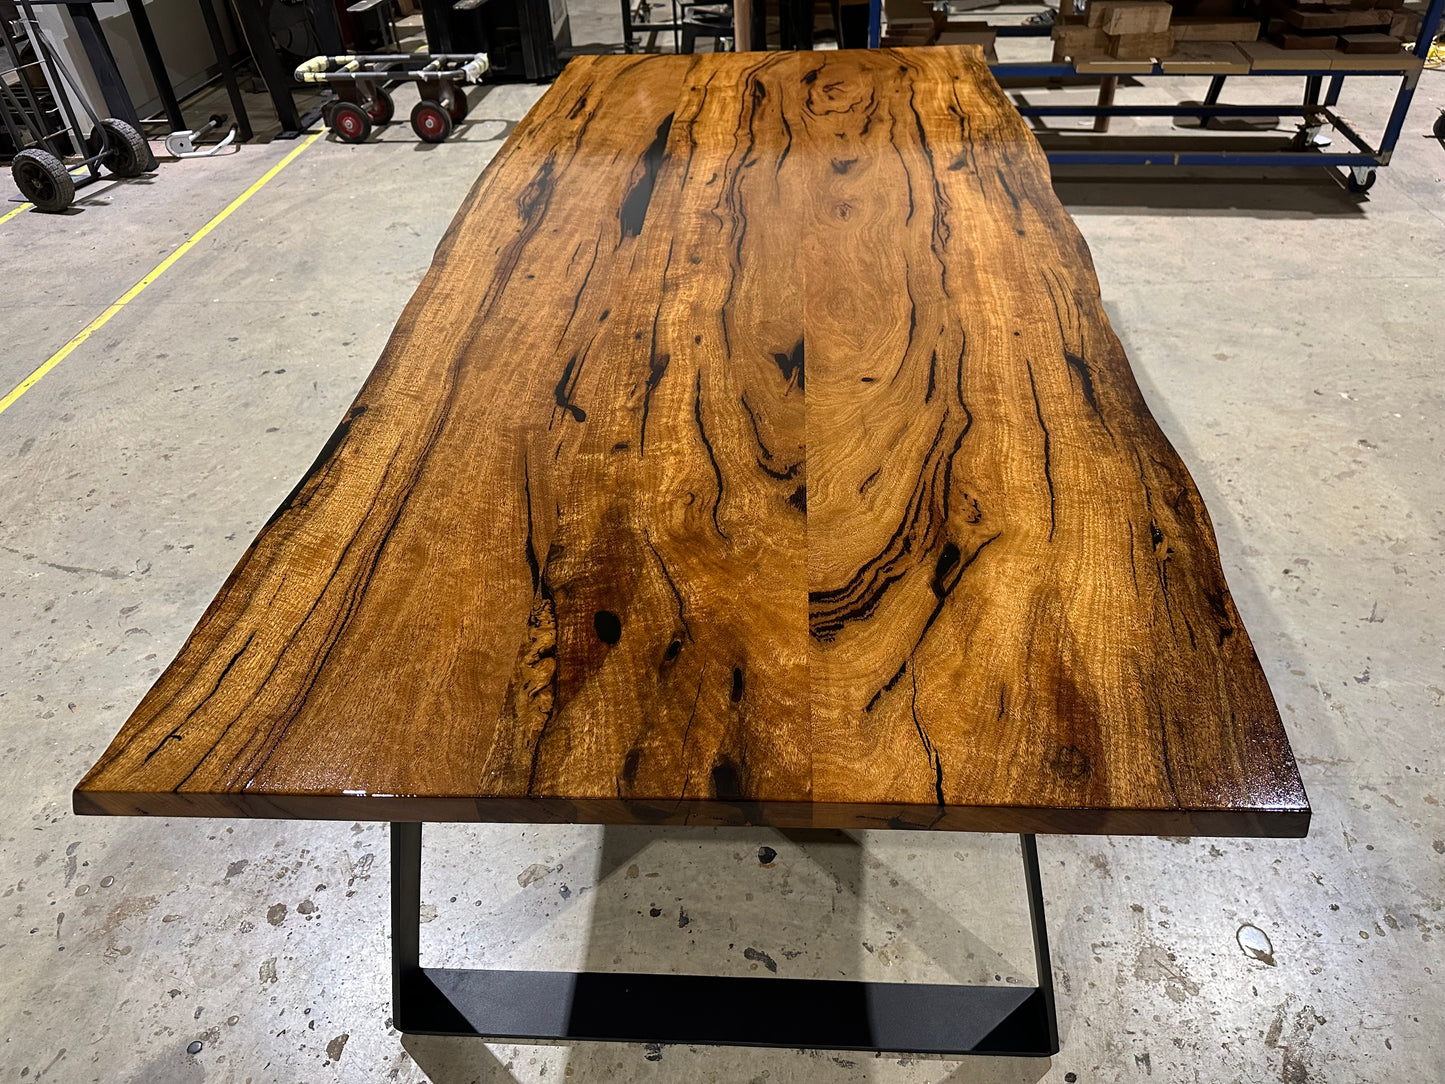 Available Now - Marri Live Edge Dining Table 2.8m long